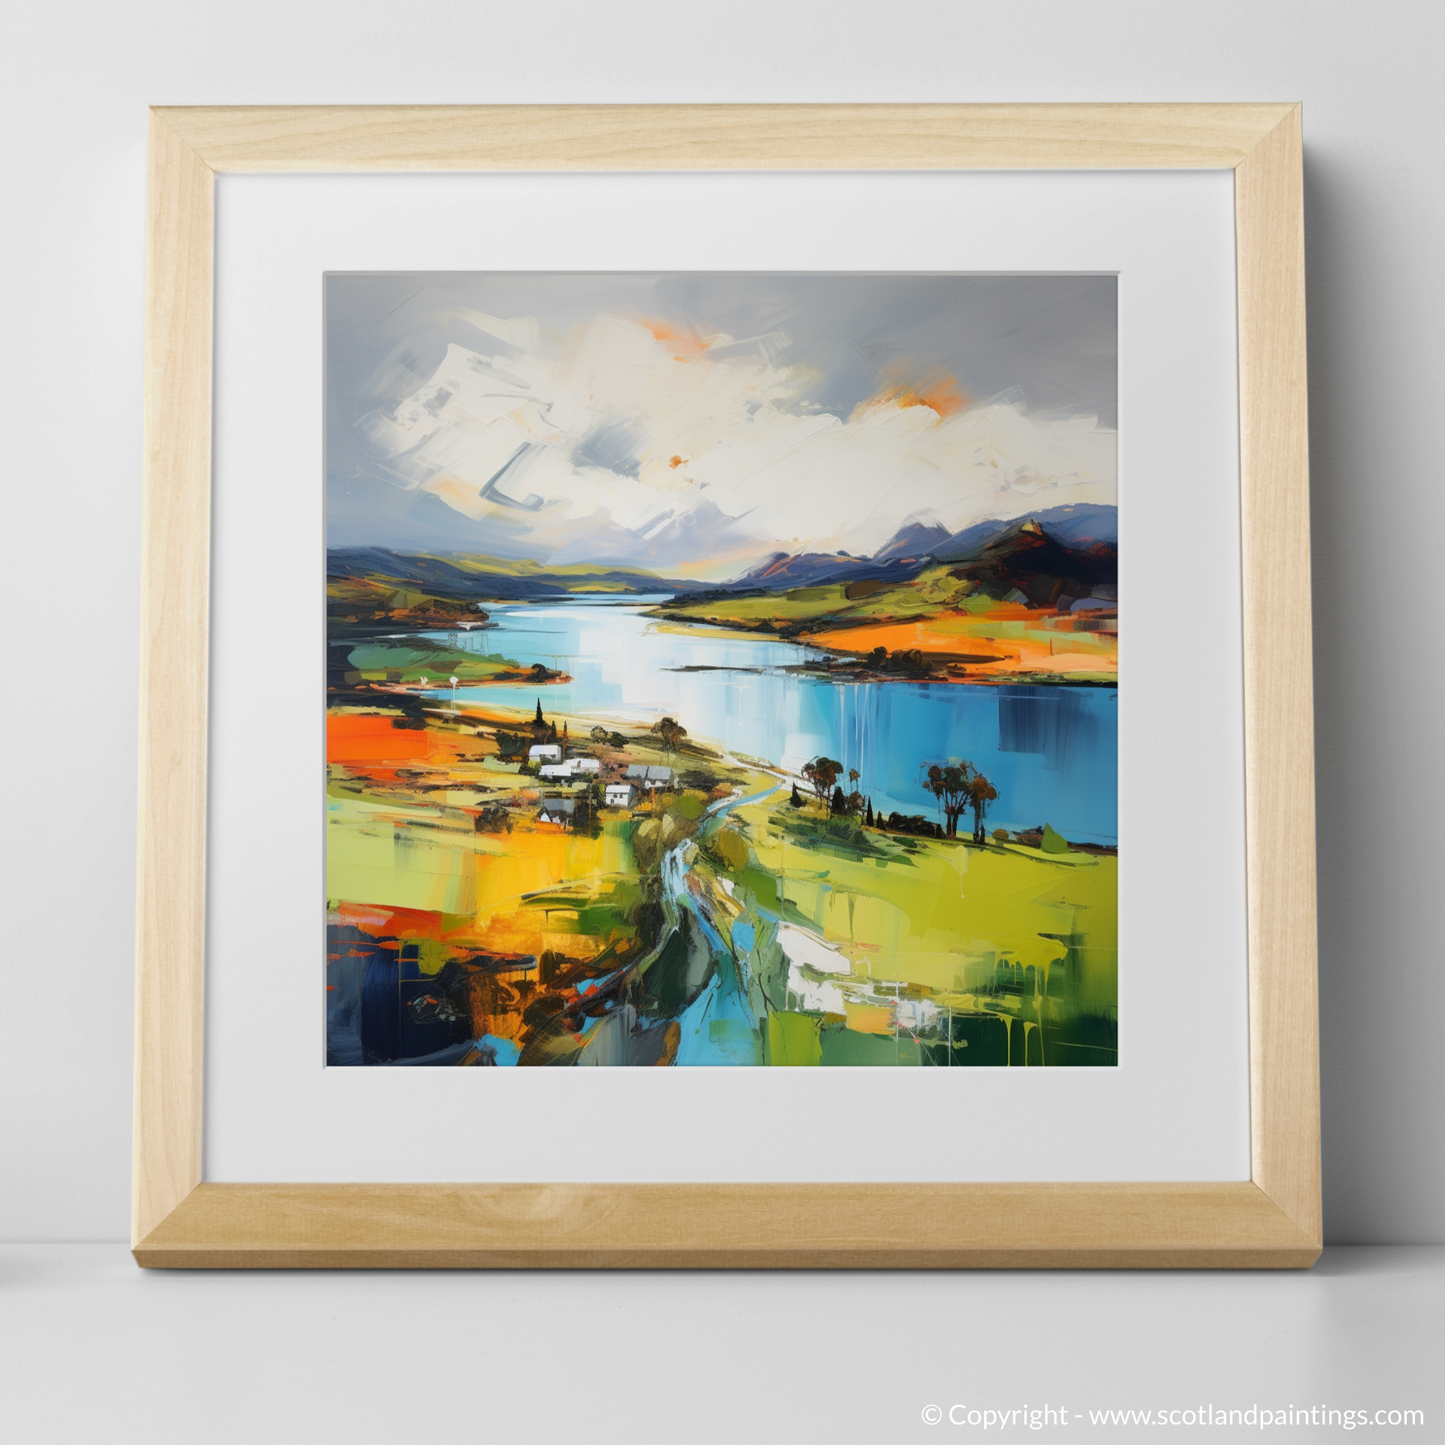 Art Print of Loch Leven, Perth and Kinross with a natural frame